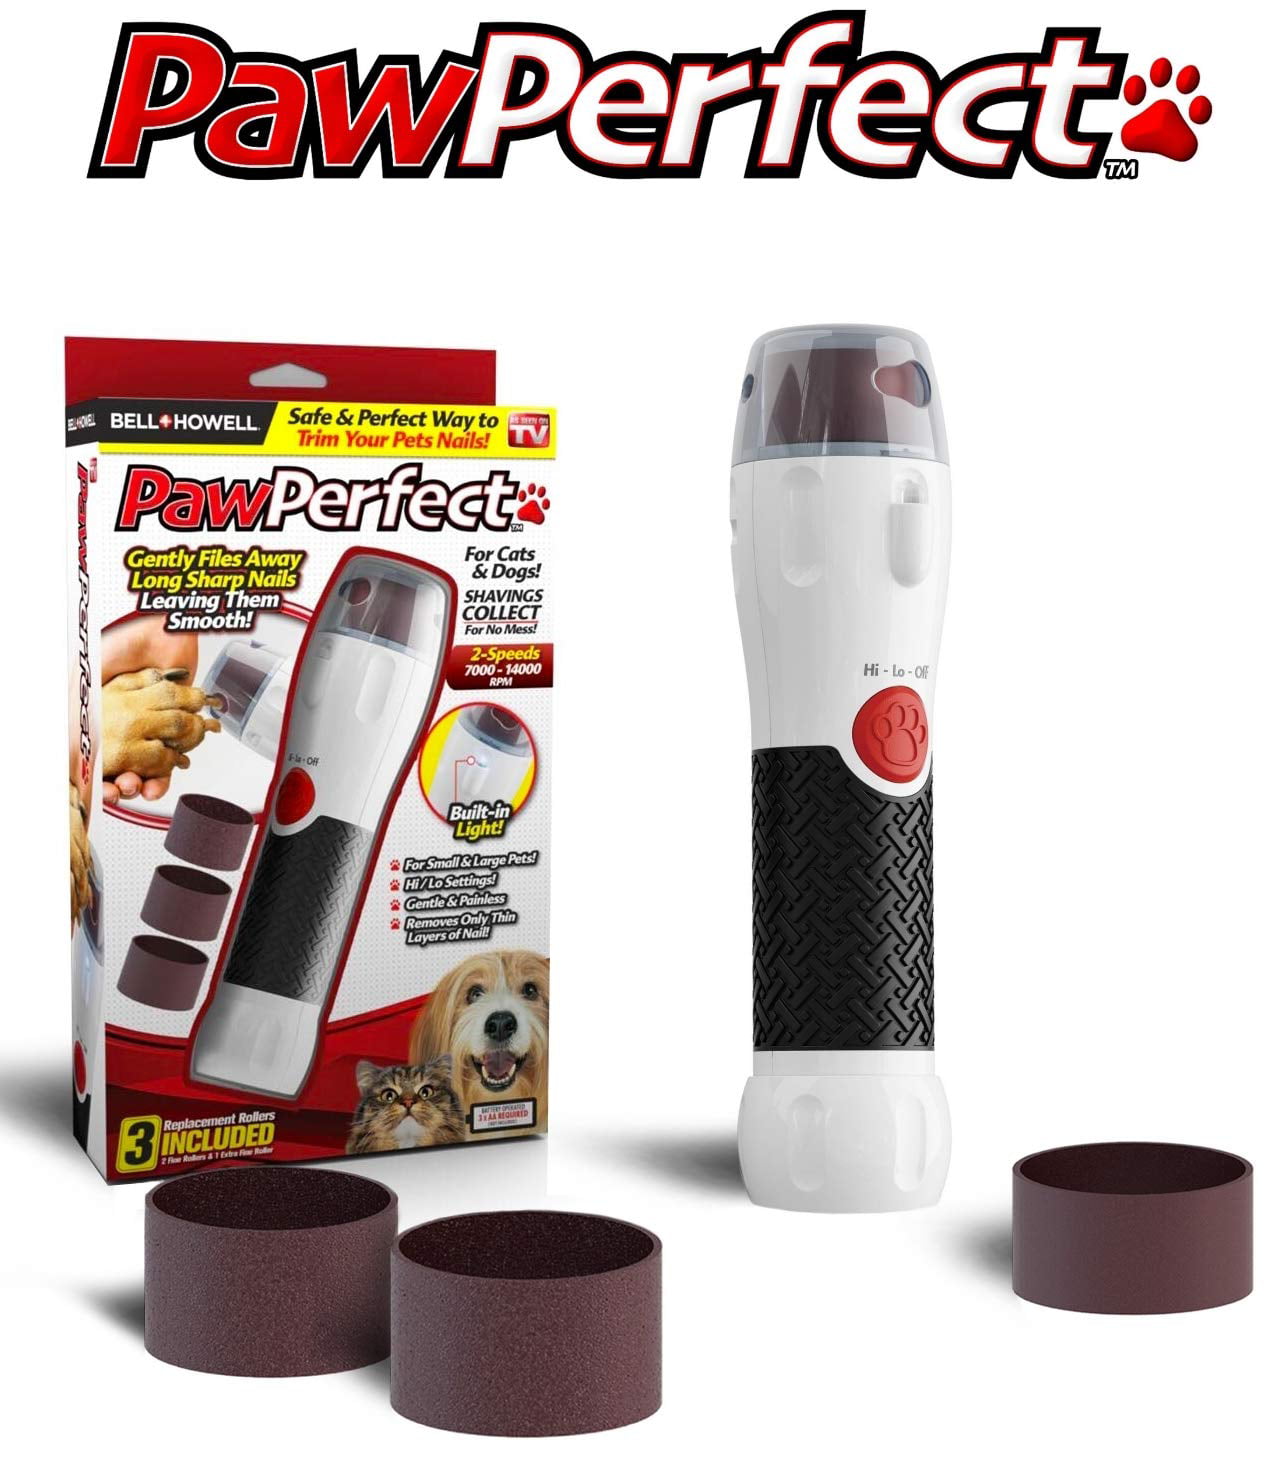 Bell + Howell Paw Perfect Pet Nail 